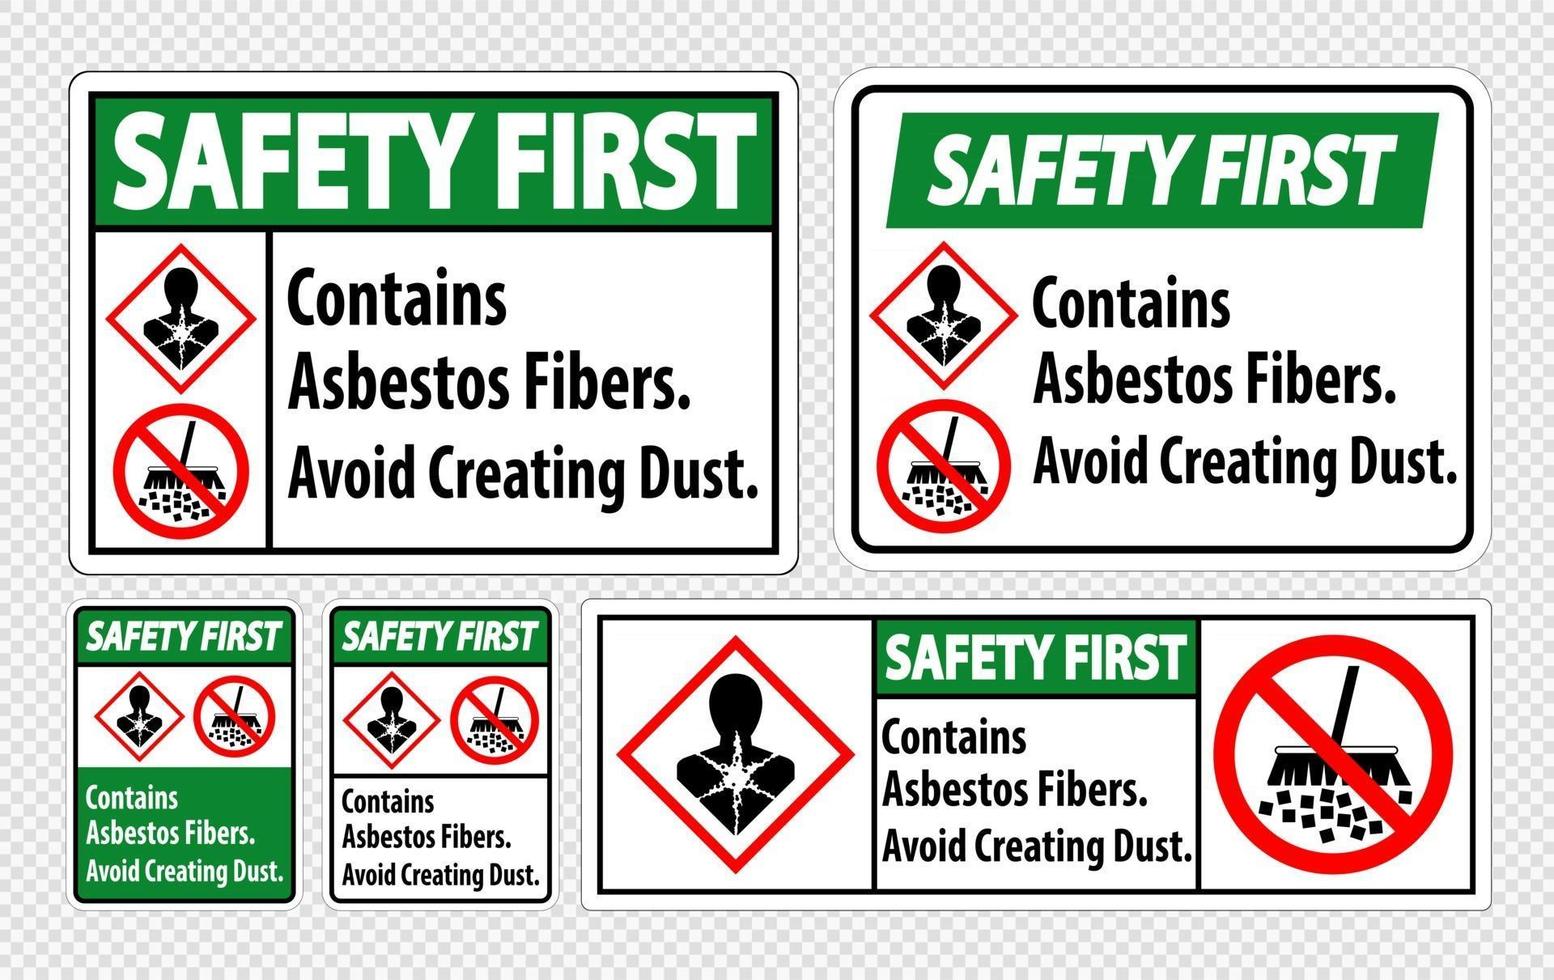 Safety First Label Contains Asbestos Fibers,Avoid Creating Dust vector